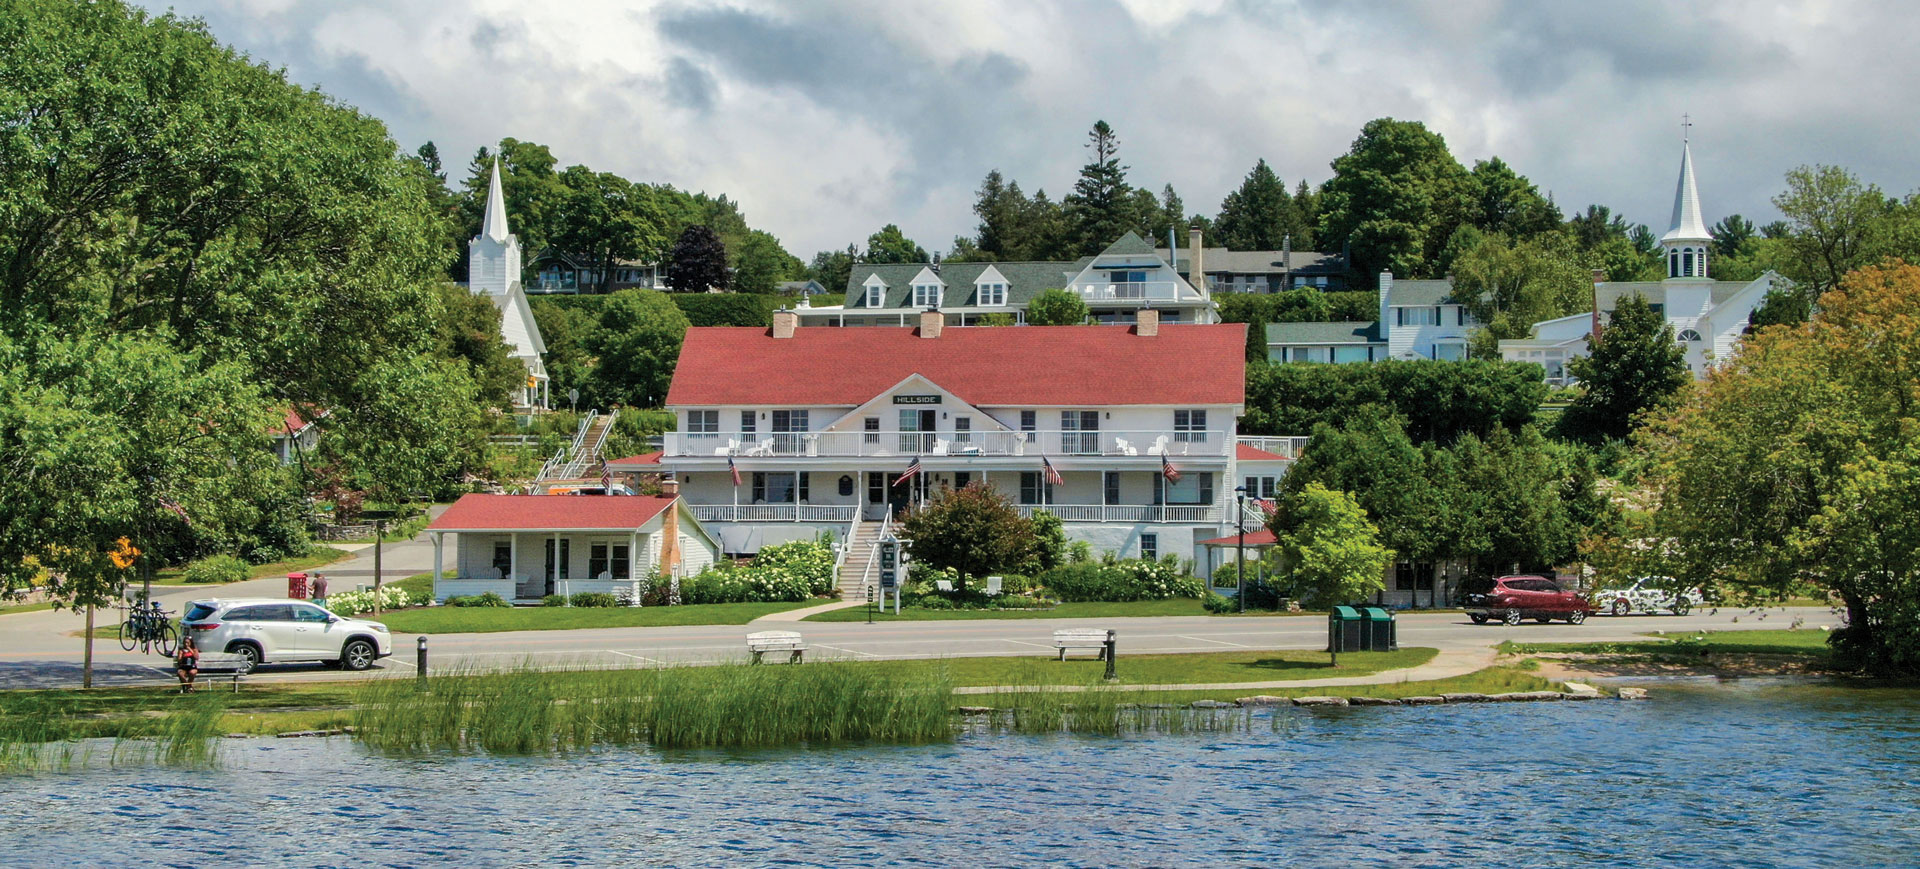 The historic Hillside Waterfront Hotel is the perfect vacation spot on Lake Michigan.